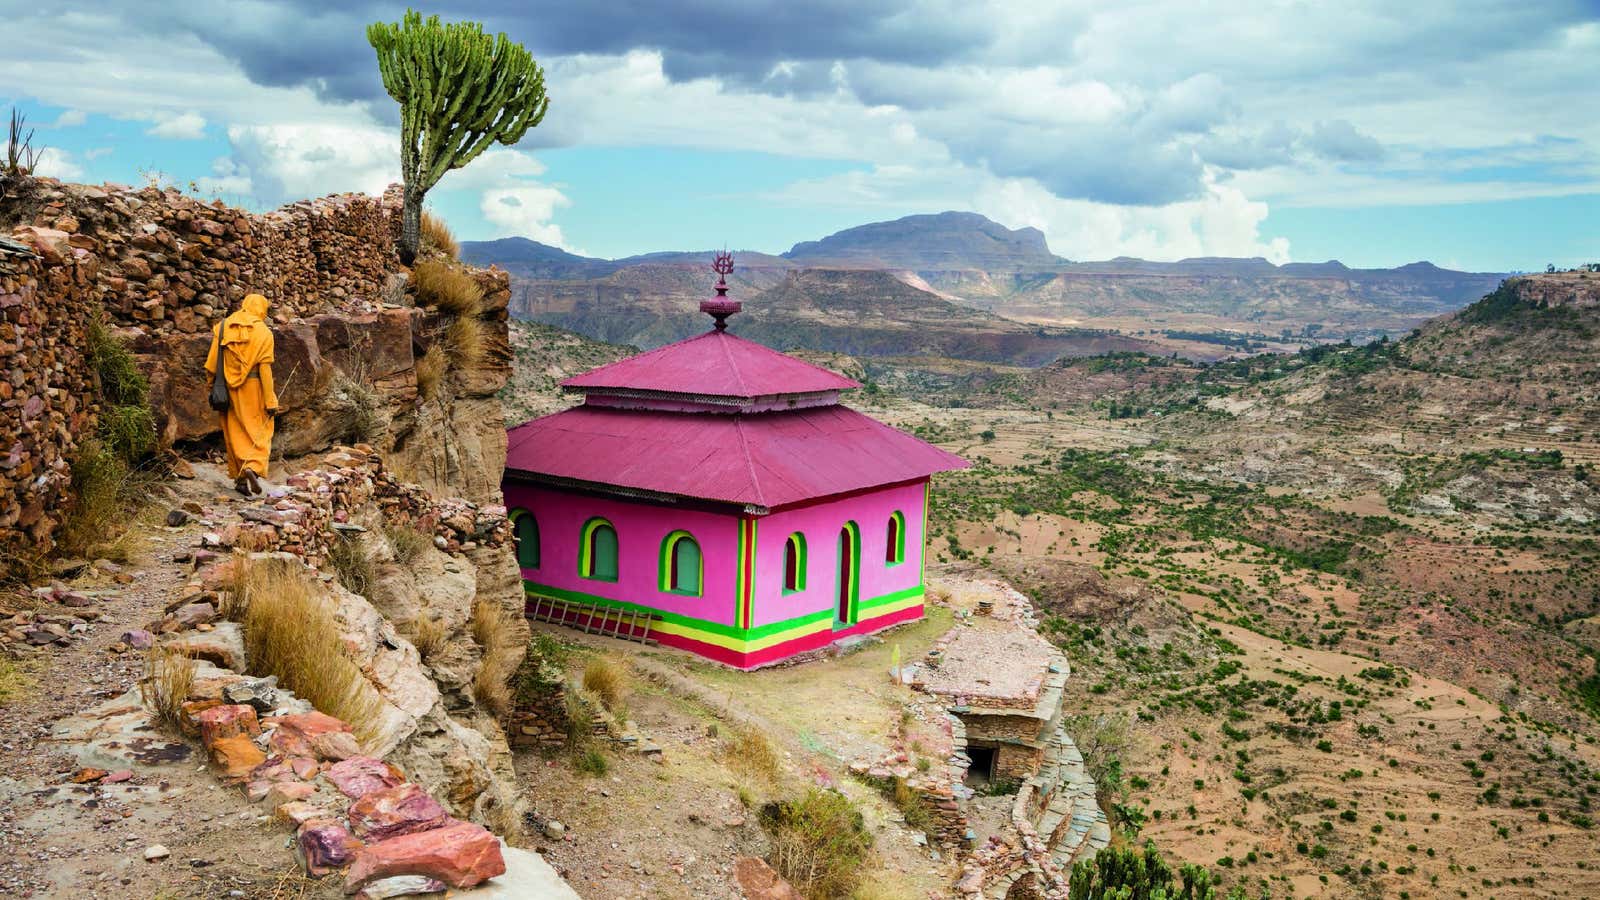 This small, modern church is built in front of the grotto where Ethiopian Saint Aragawi is said to have vanished.